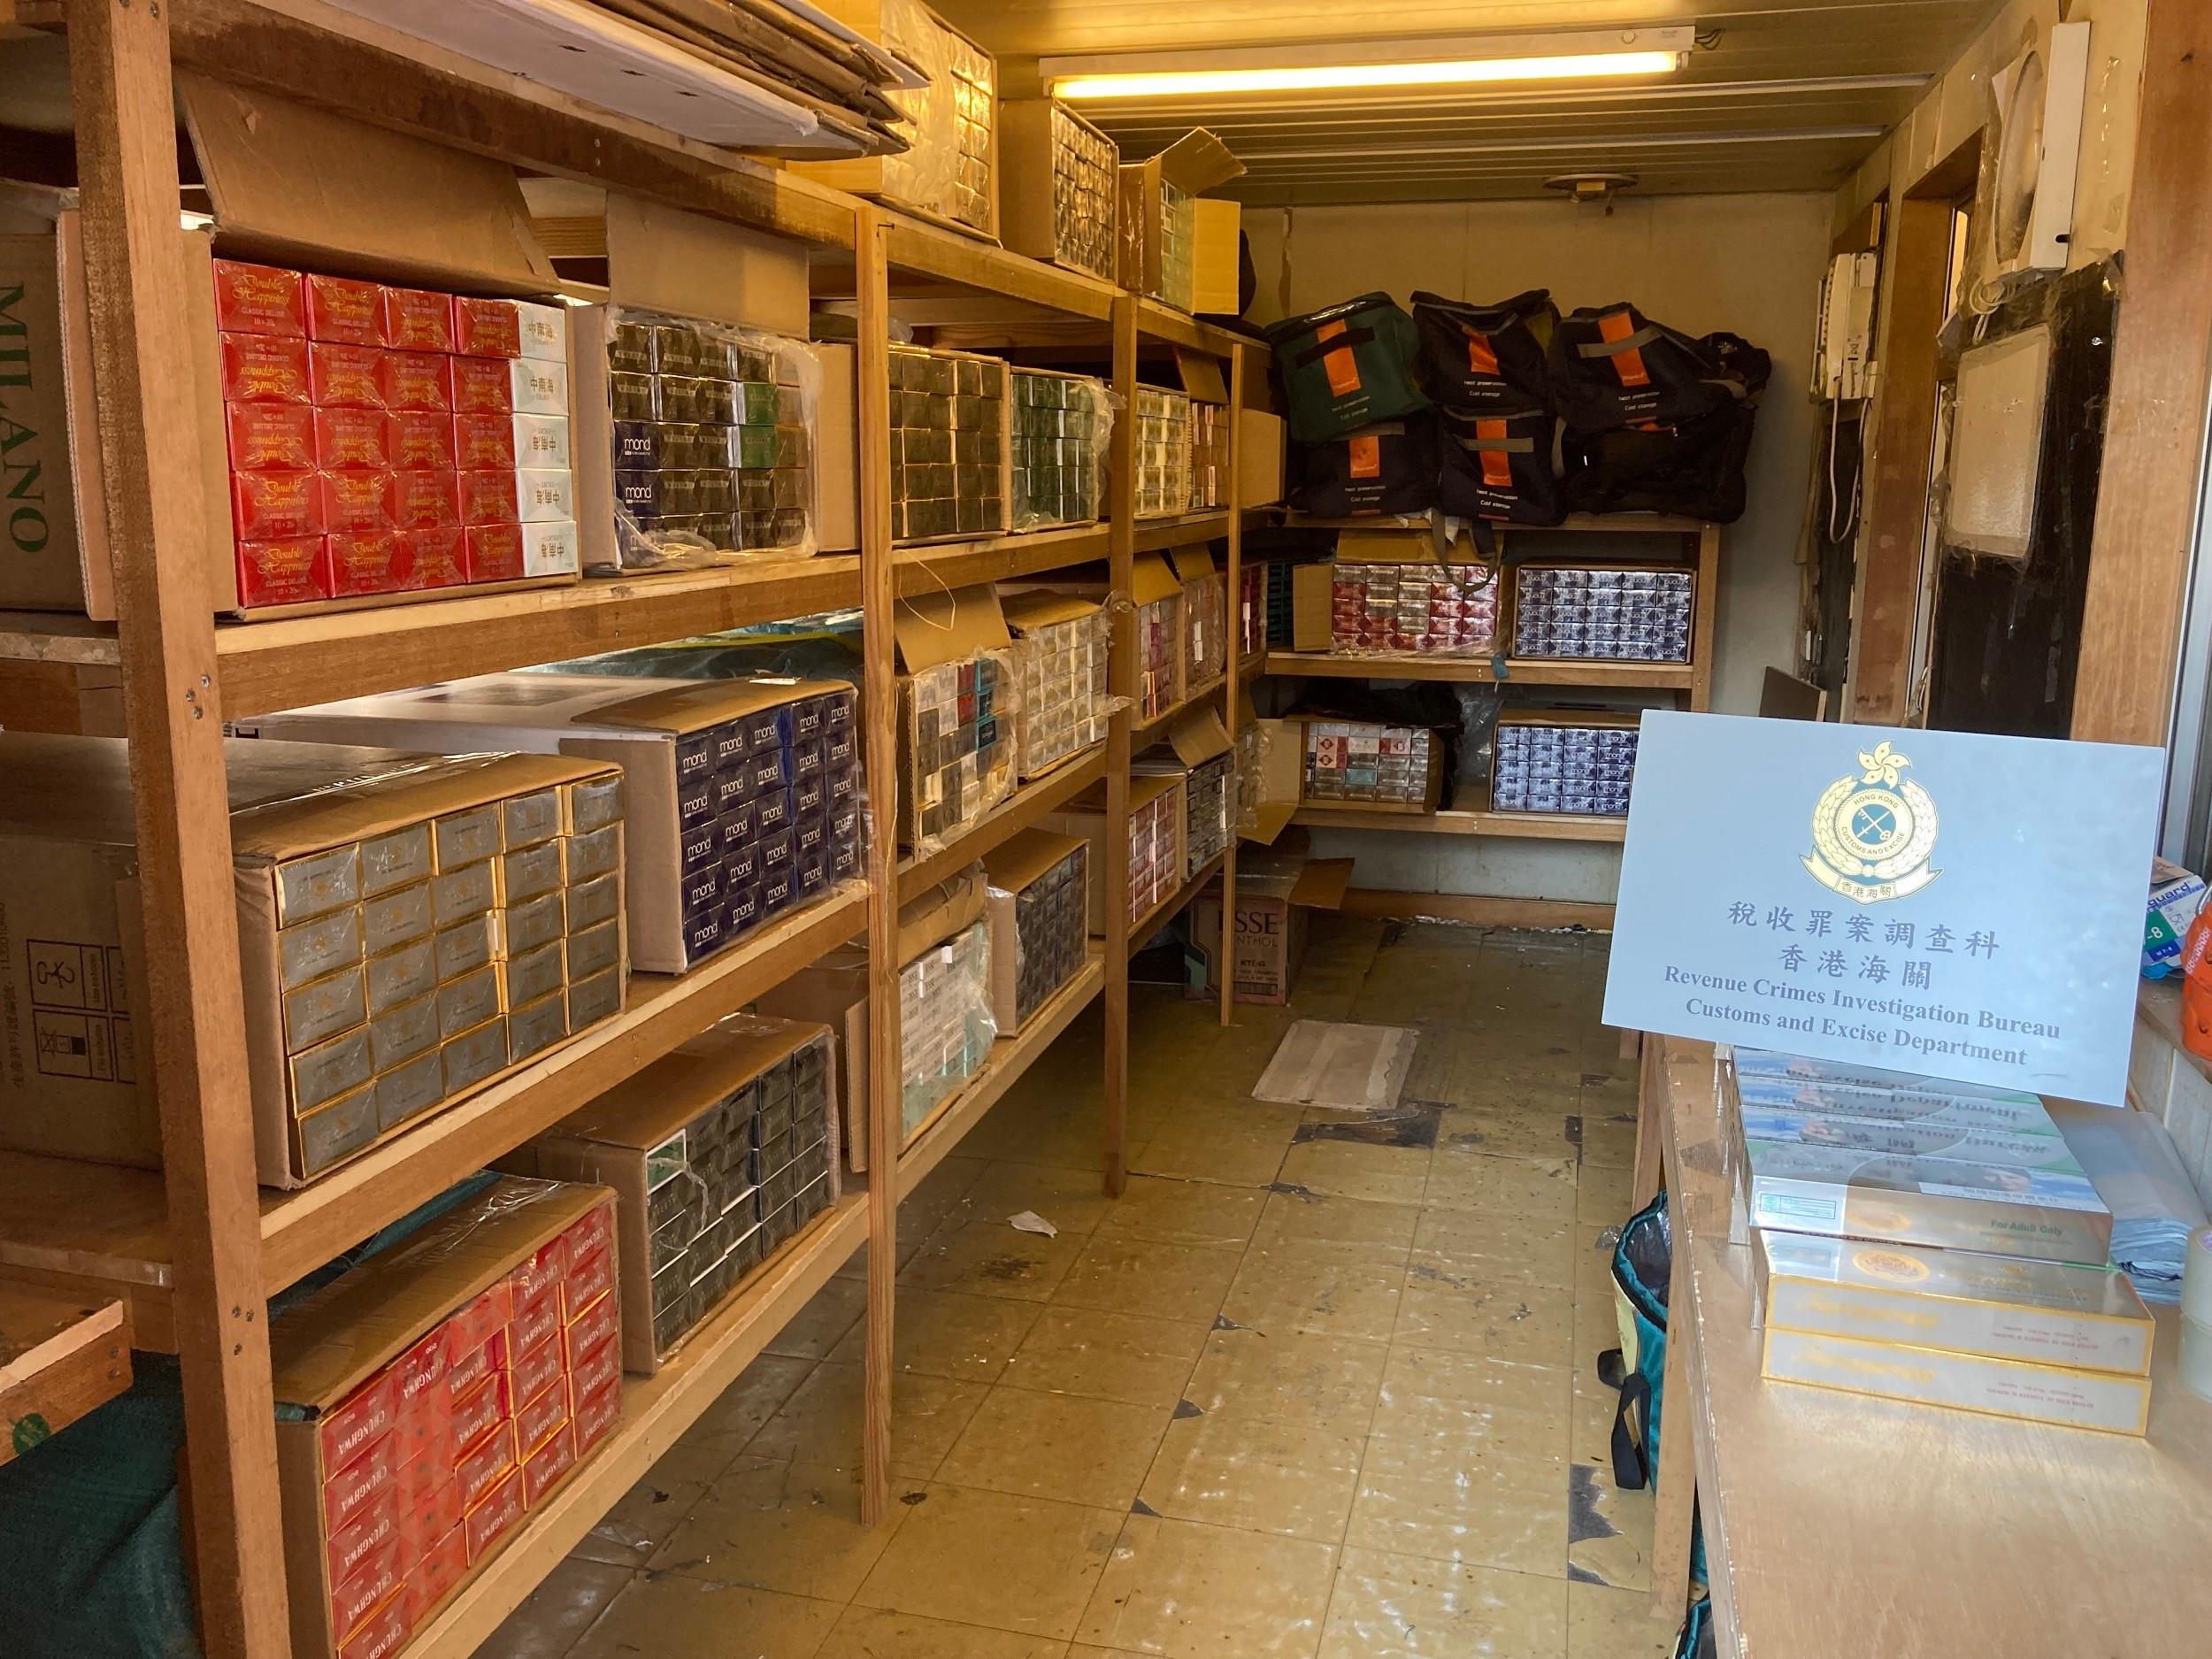 Hong Kong Customs today (January 4) raided a suspected illicit cigarette storage in Yuen Long and seized about 1.75 million suspected illicit cigarettes with an estimated market value of about $4.8 million and a duty potential of about $3.3 million. Photo shows the suspected illicit cigarettes stored in a metal hut.